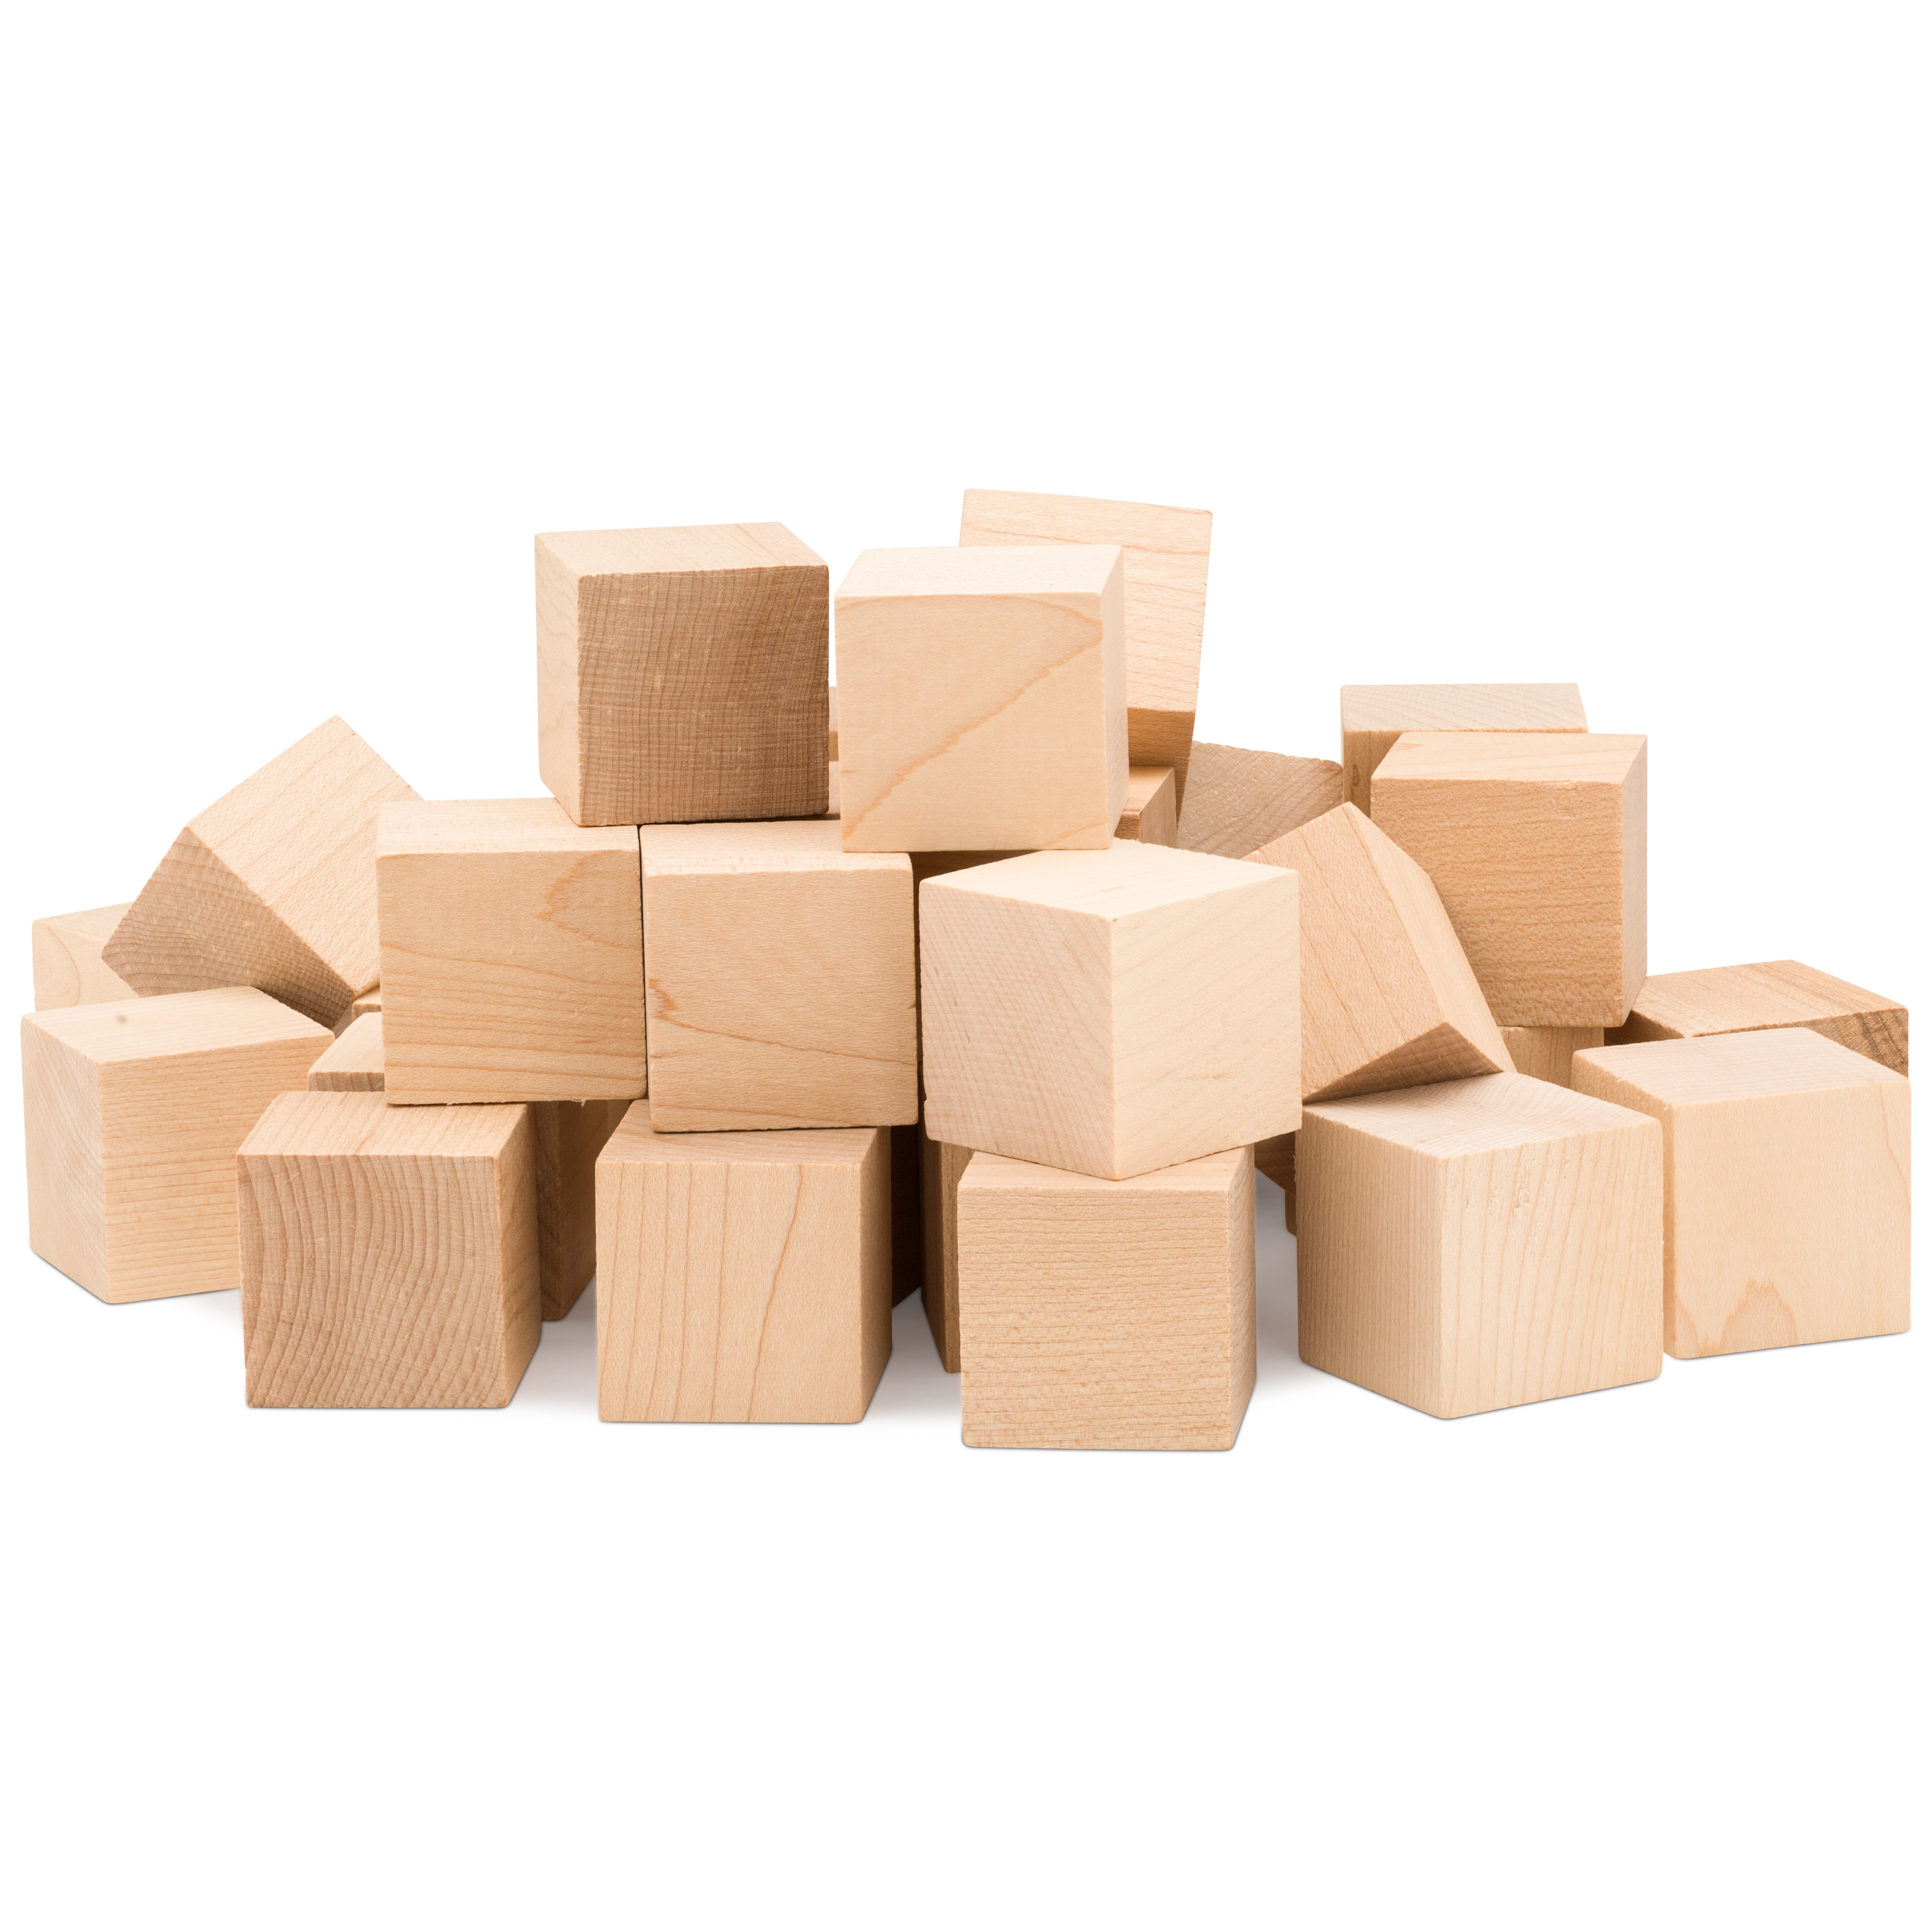 Unfinished Wooden Blocks 1/2 inch, Pack of 100 Small Wood Cubes for Crafts  and DIY Home Decor, by Woodpeckers 